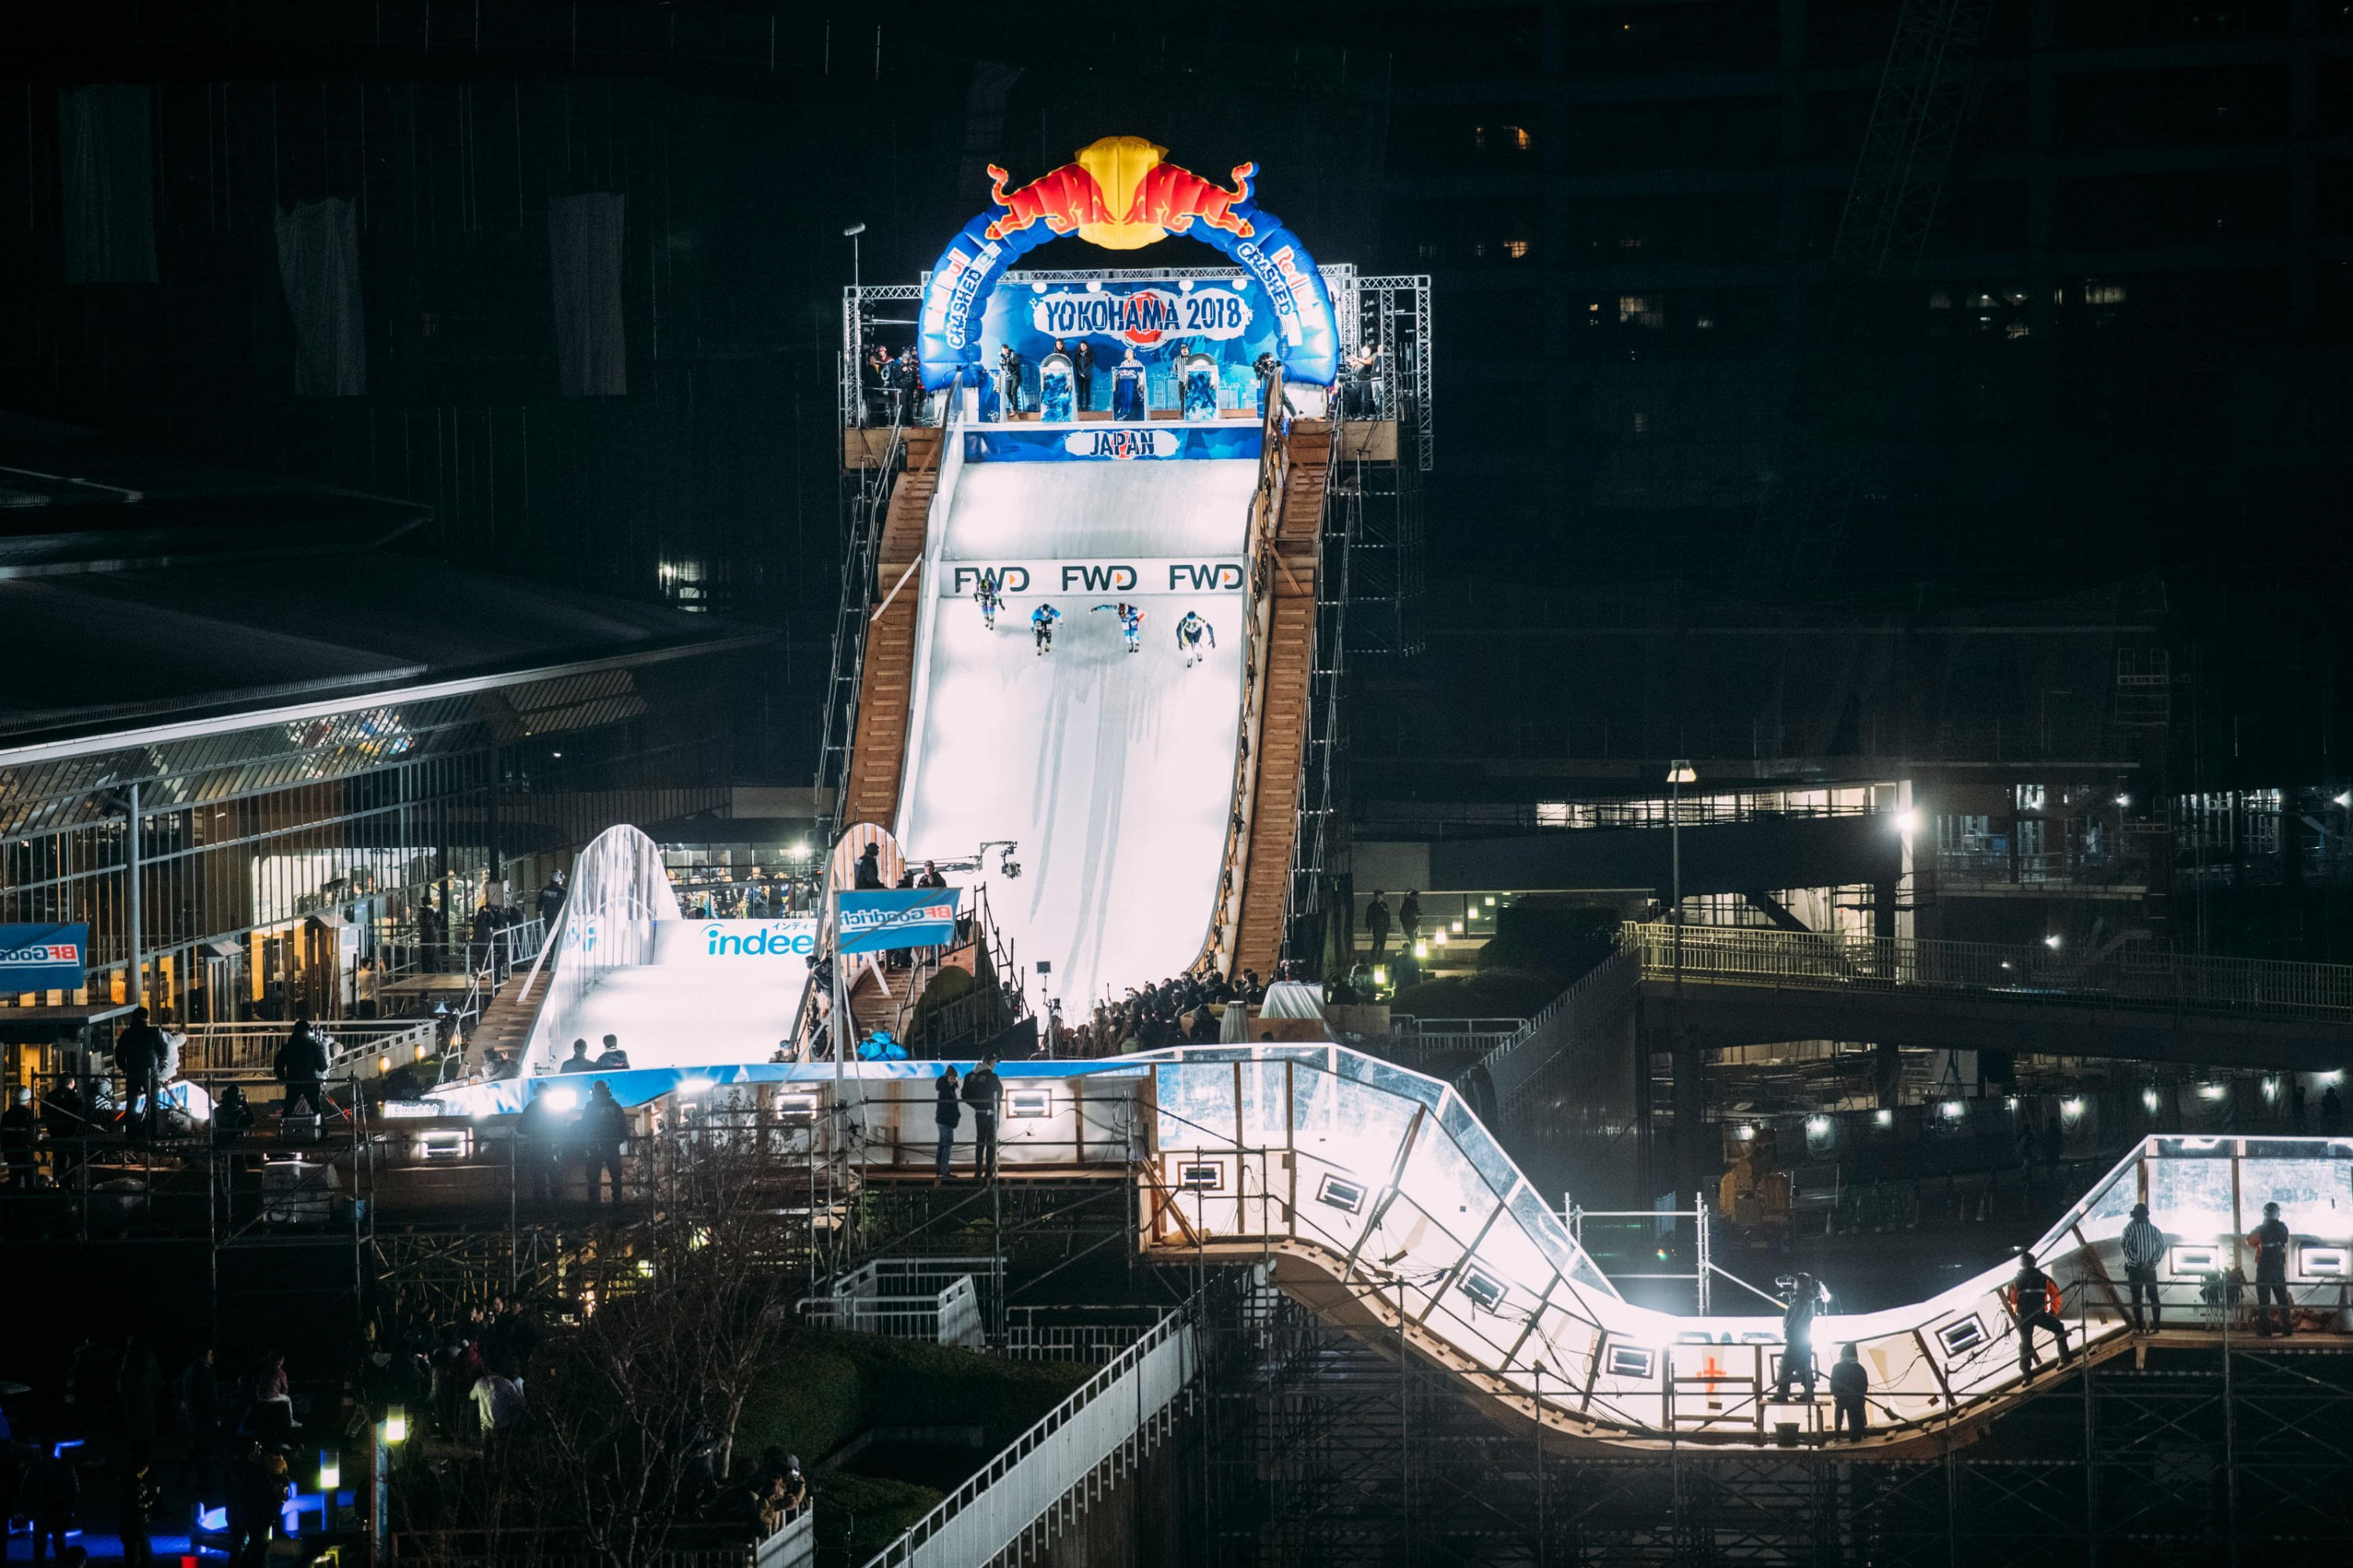 The 2020 track will feature even more challenges for the athletes. Image: Suguru Saito / Red Bull Content Pool